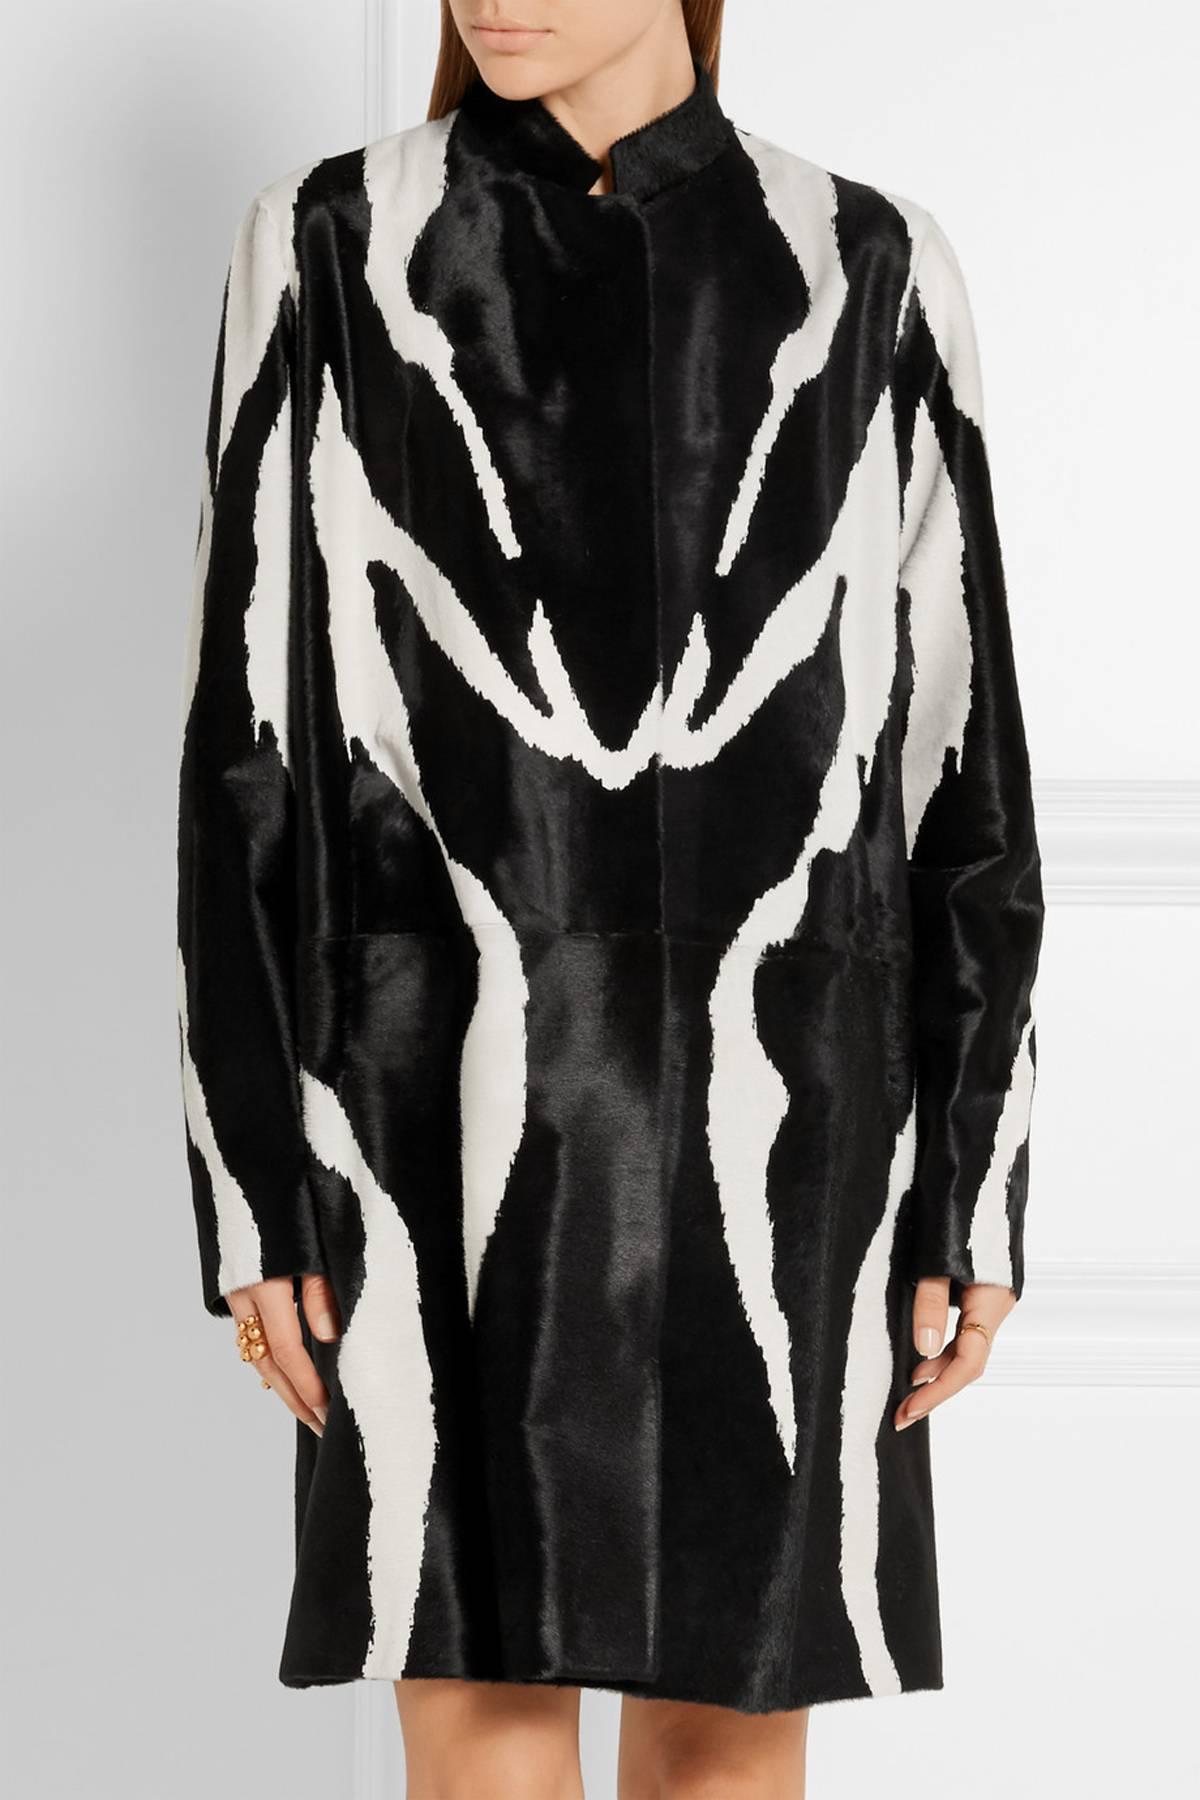 New TOM FORD Zebra-Print Calf Hair Coat
Italian Size 38 - US 4 (Oversize Style - will fit bigger sizes also).
Zebra Motif, Concealed Leather Buttons, Fully  Lined in Smooth Silk, Two Side Pockets.
Made in Italy.
New with Tag.